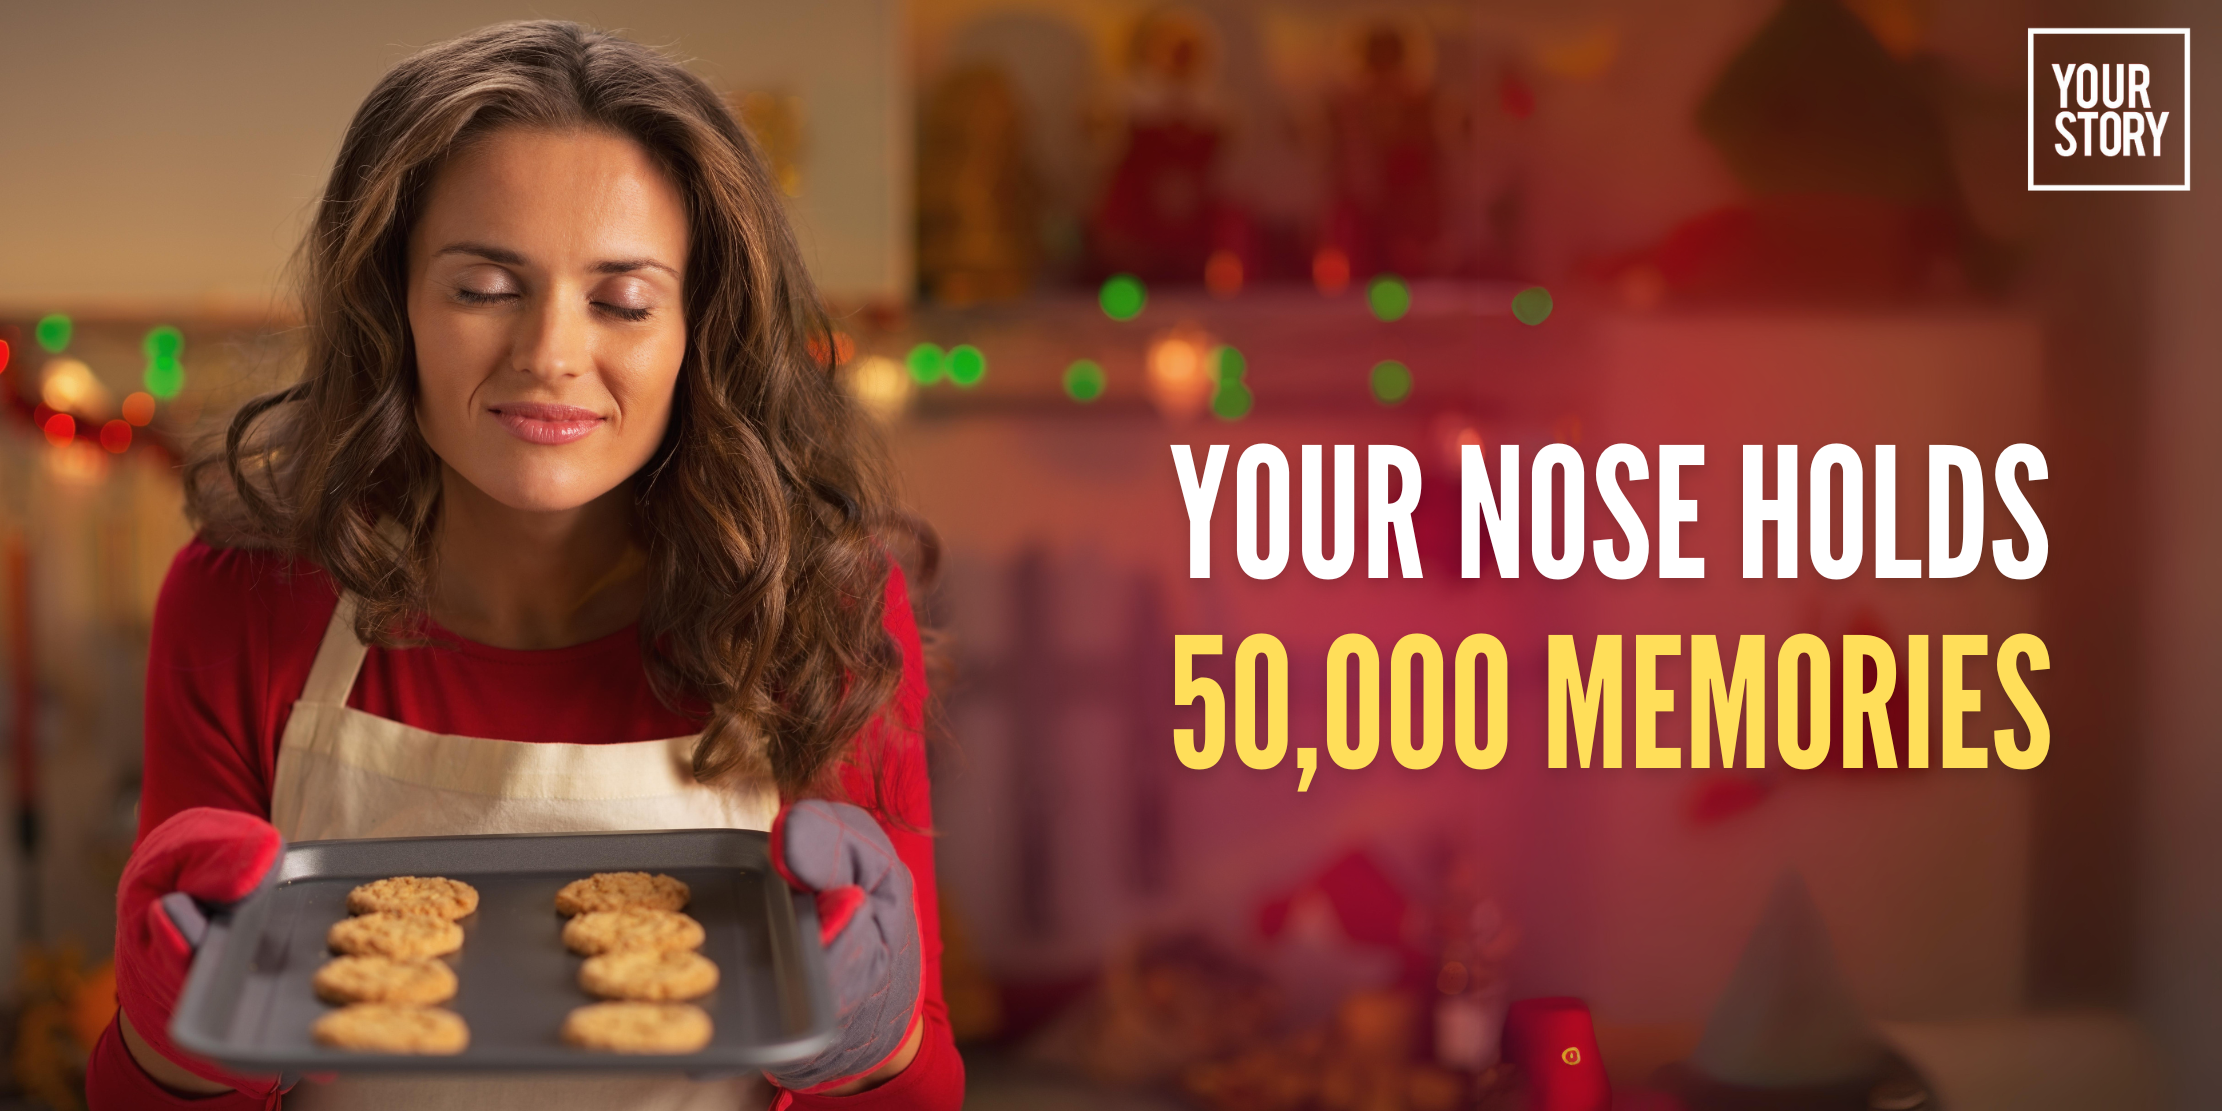 ⁠⁠From Grandma's Cookies to Danger: How Your Nose Holds 50,000 Memories (and Keeps You Safe)